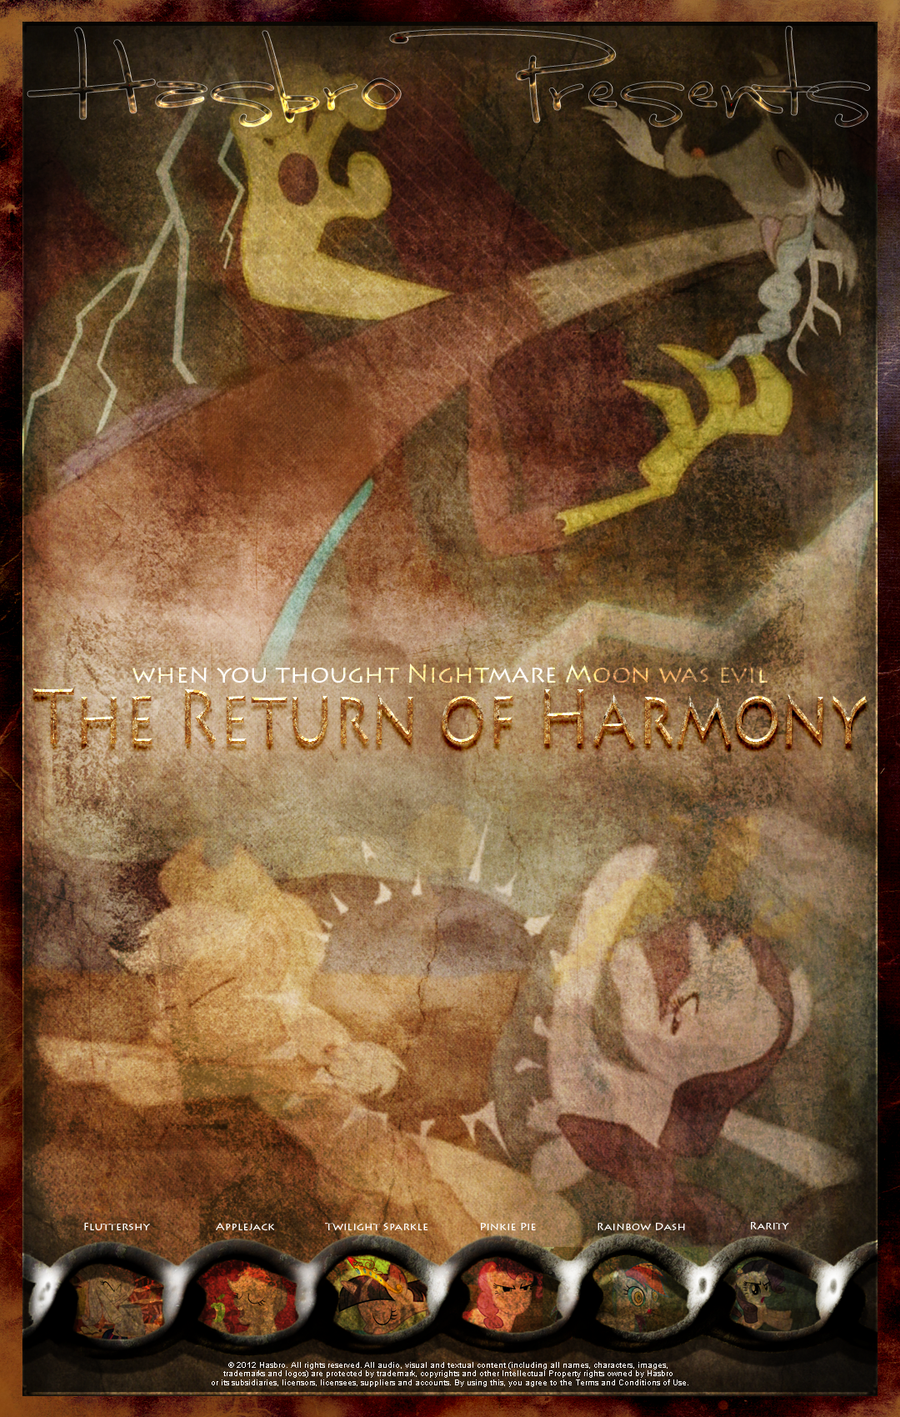 mlp___the_return_of_harmony___movie_poster_by_pims1978-d53vhwy.png